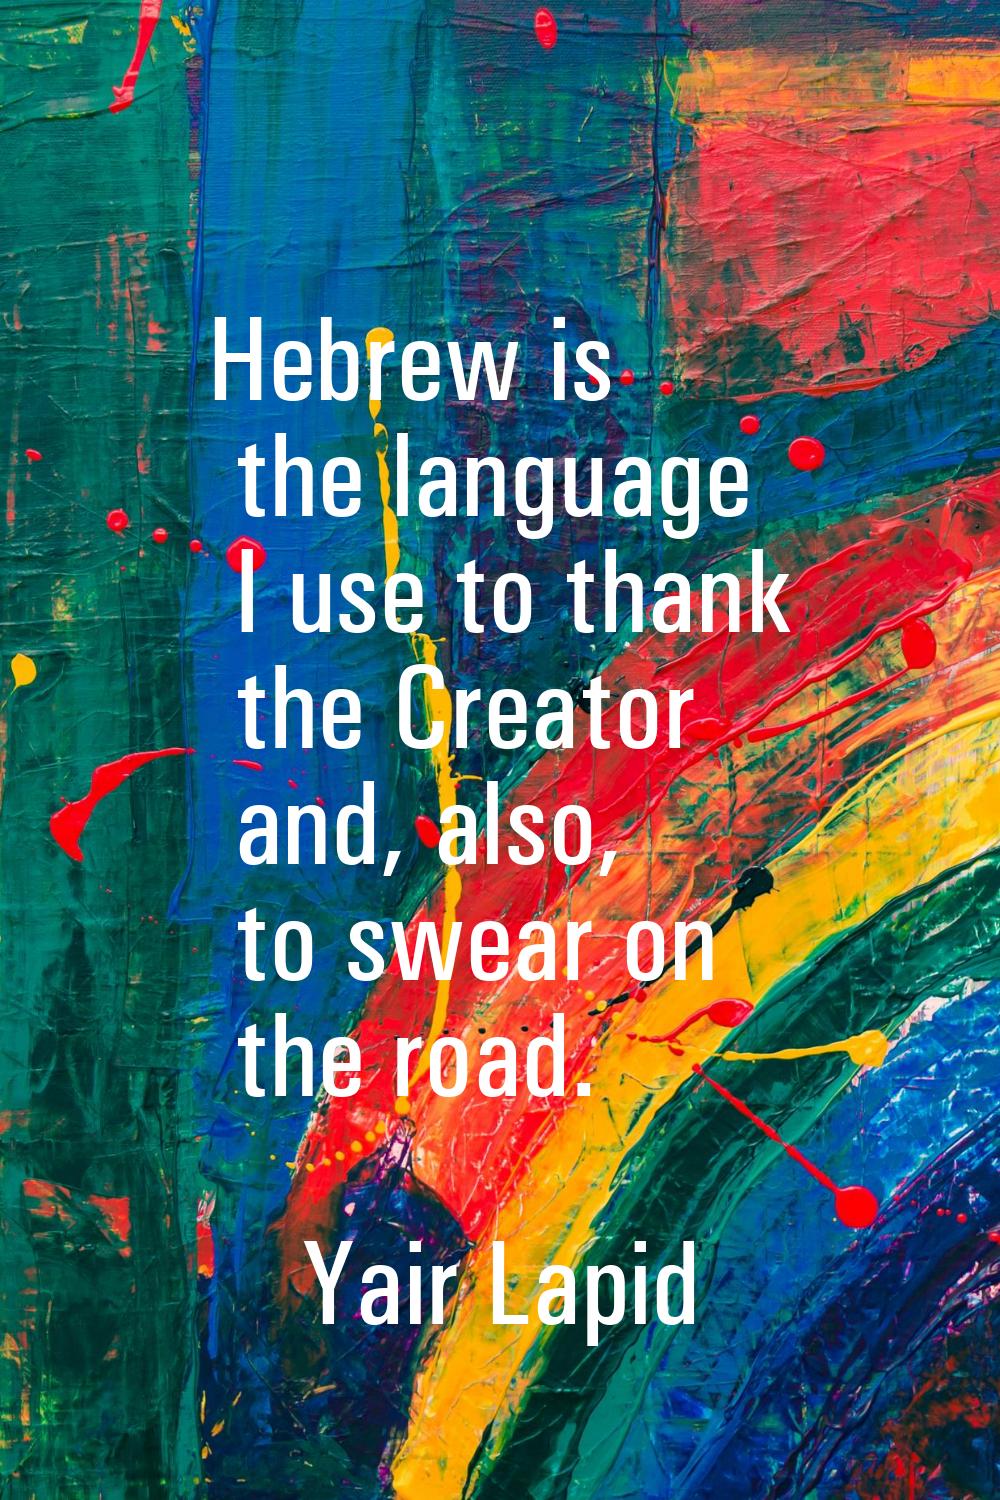 Hebrew is the language I use to thank the Creator and, also, to swear on the road.